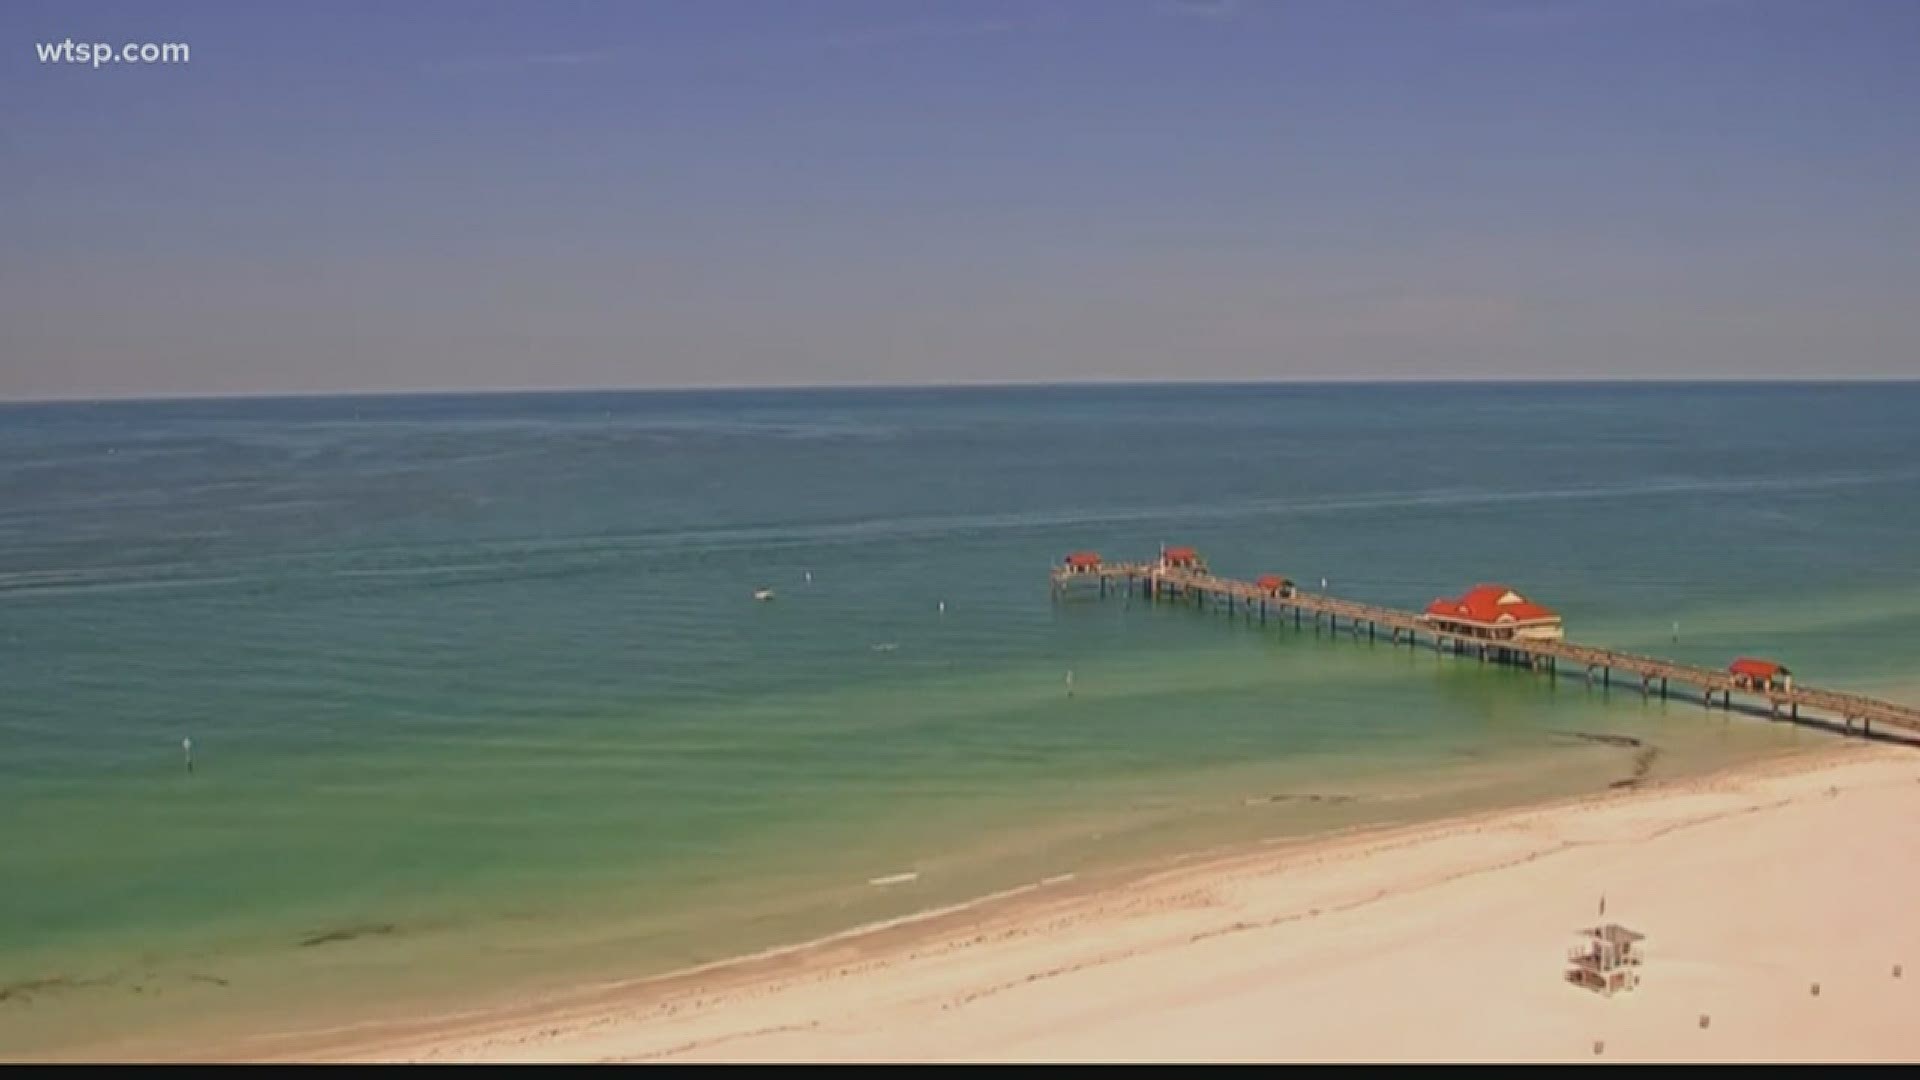 We will have to wait a while longer for beaches to reopen in Pinellas County.